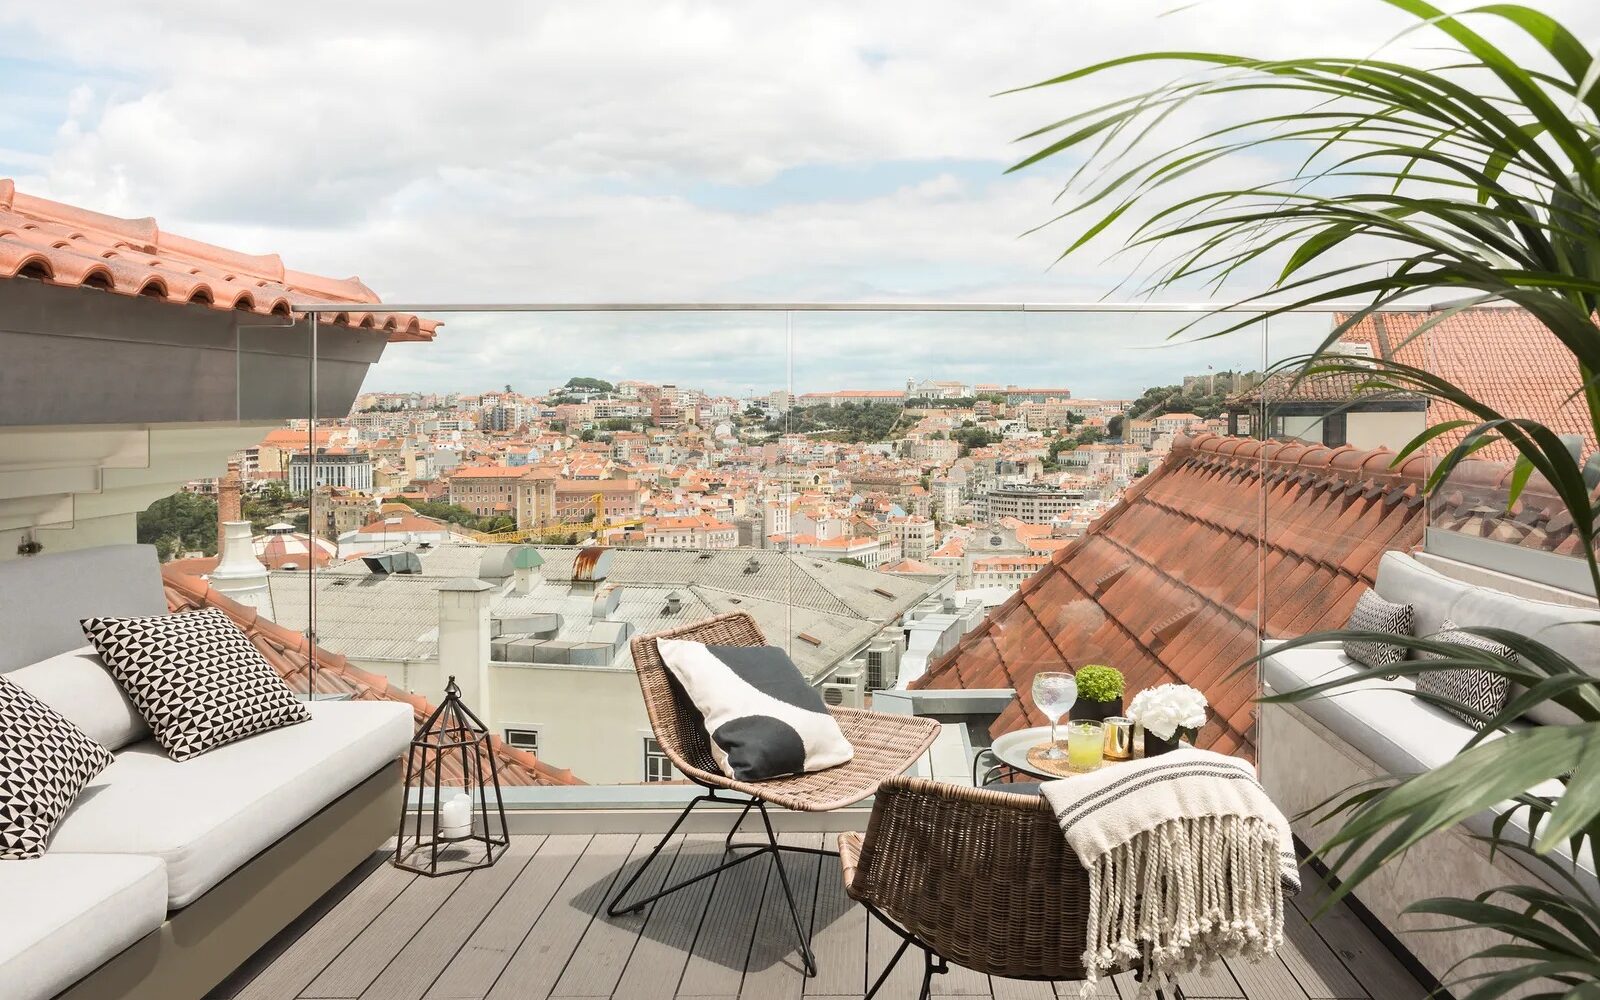 This Apartment-style Hotel Is a Boutique Gem in Lisbon’s Hippest Neighborhood